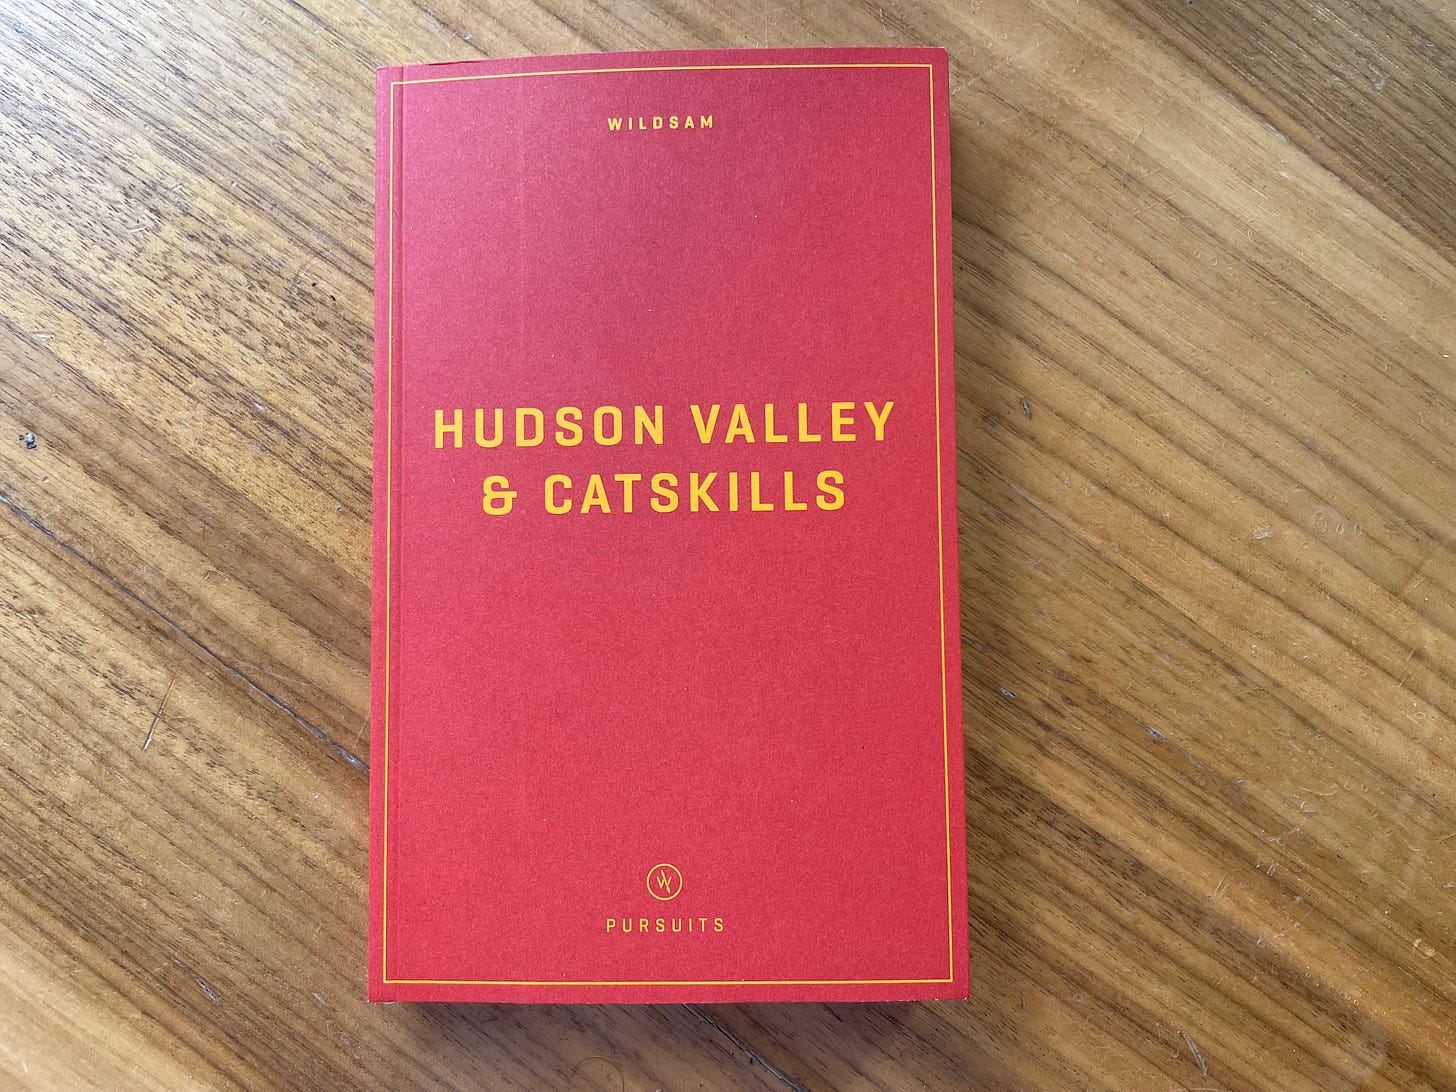 Photo of Wilsdam Hudson Valley & Catskills, a red guide with yellow lettering, on a wooden table